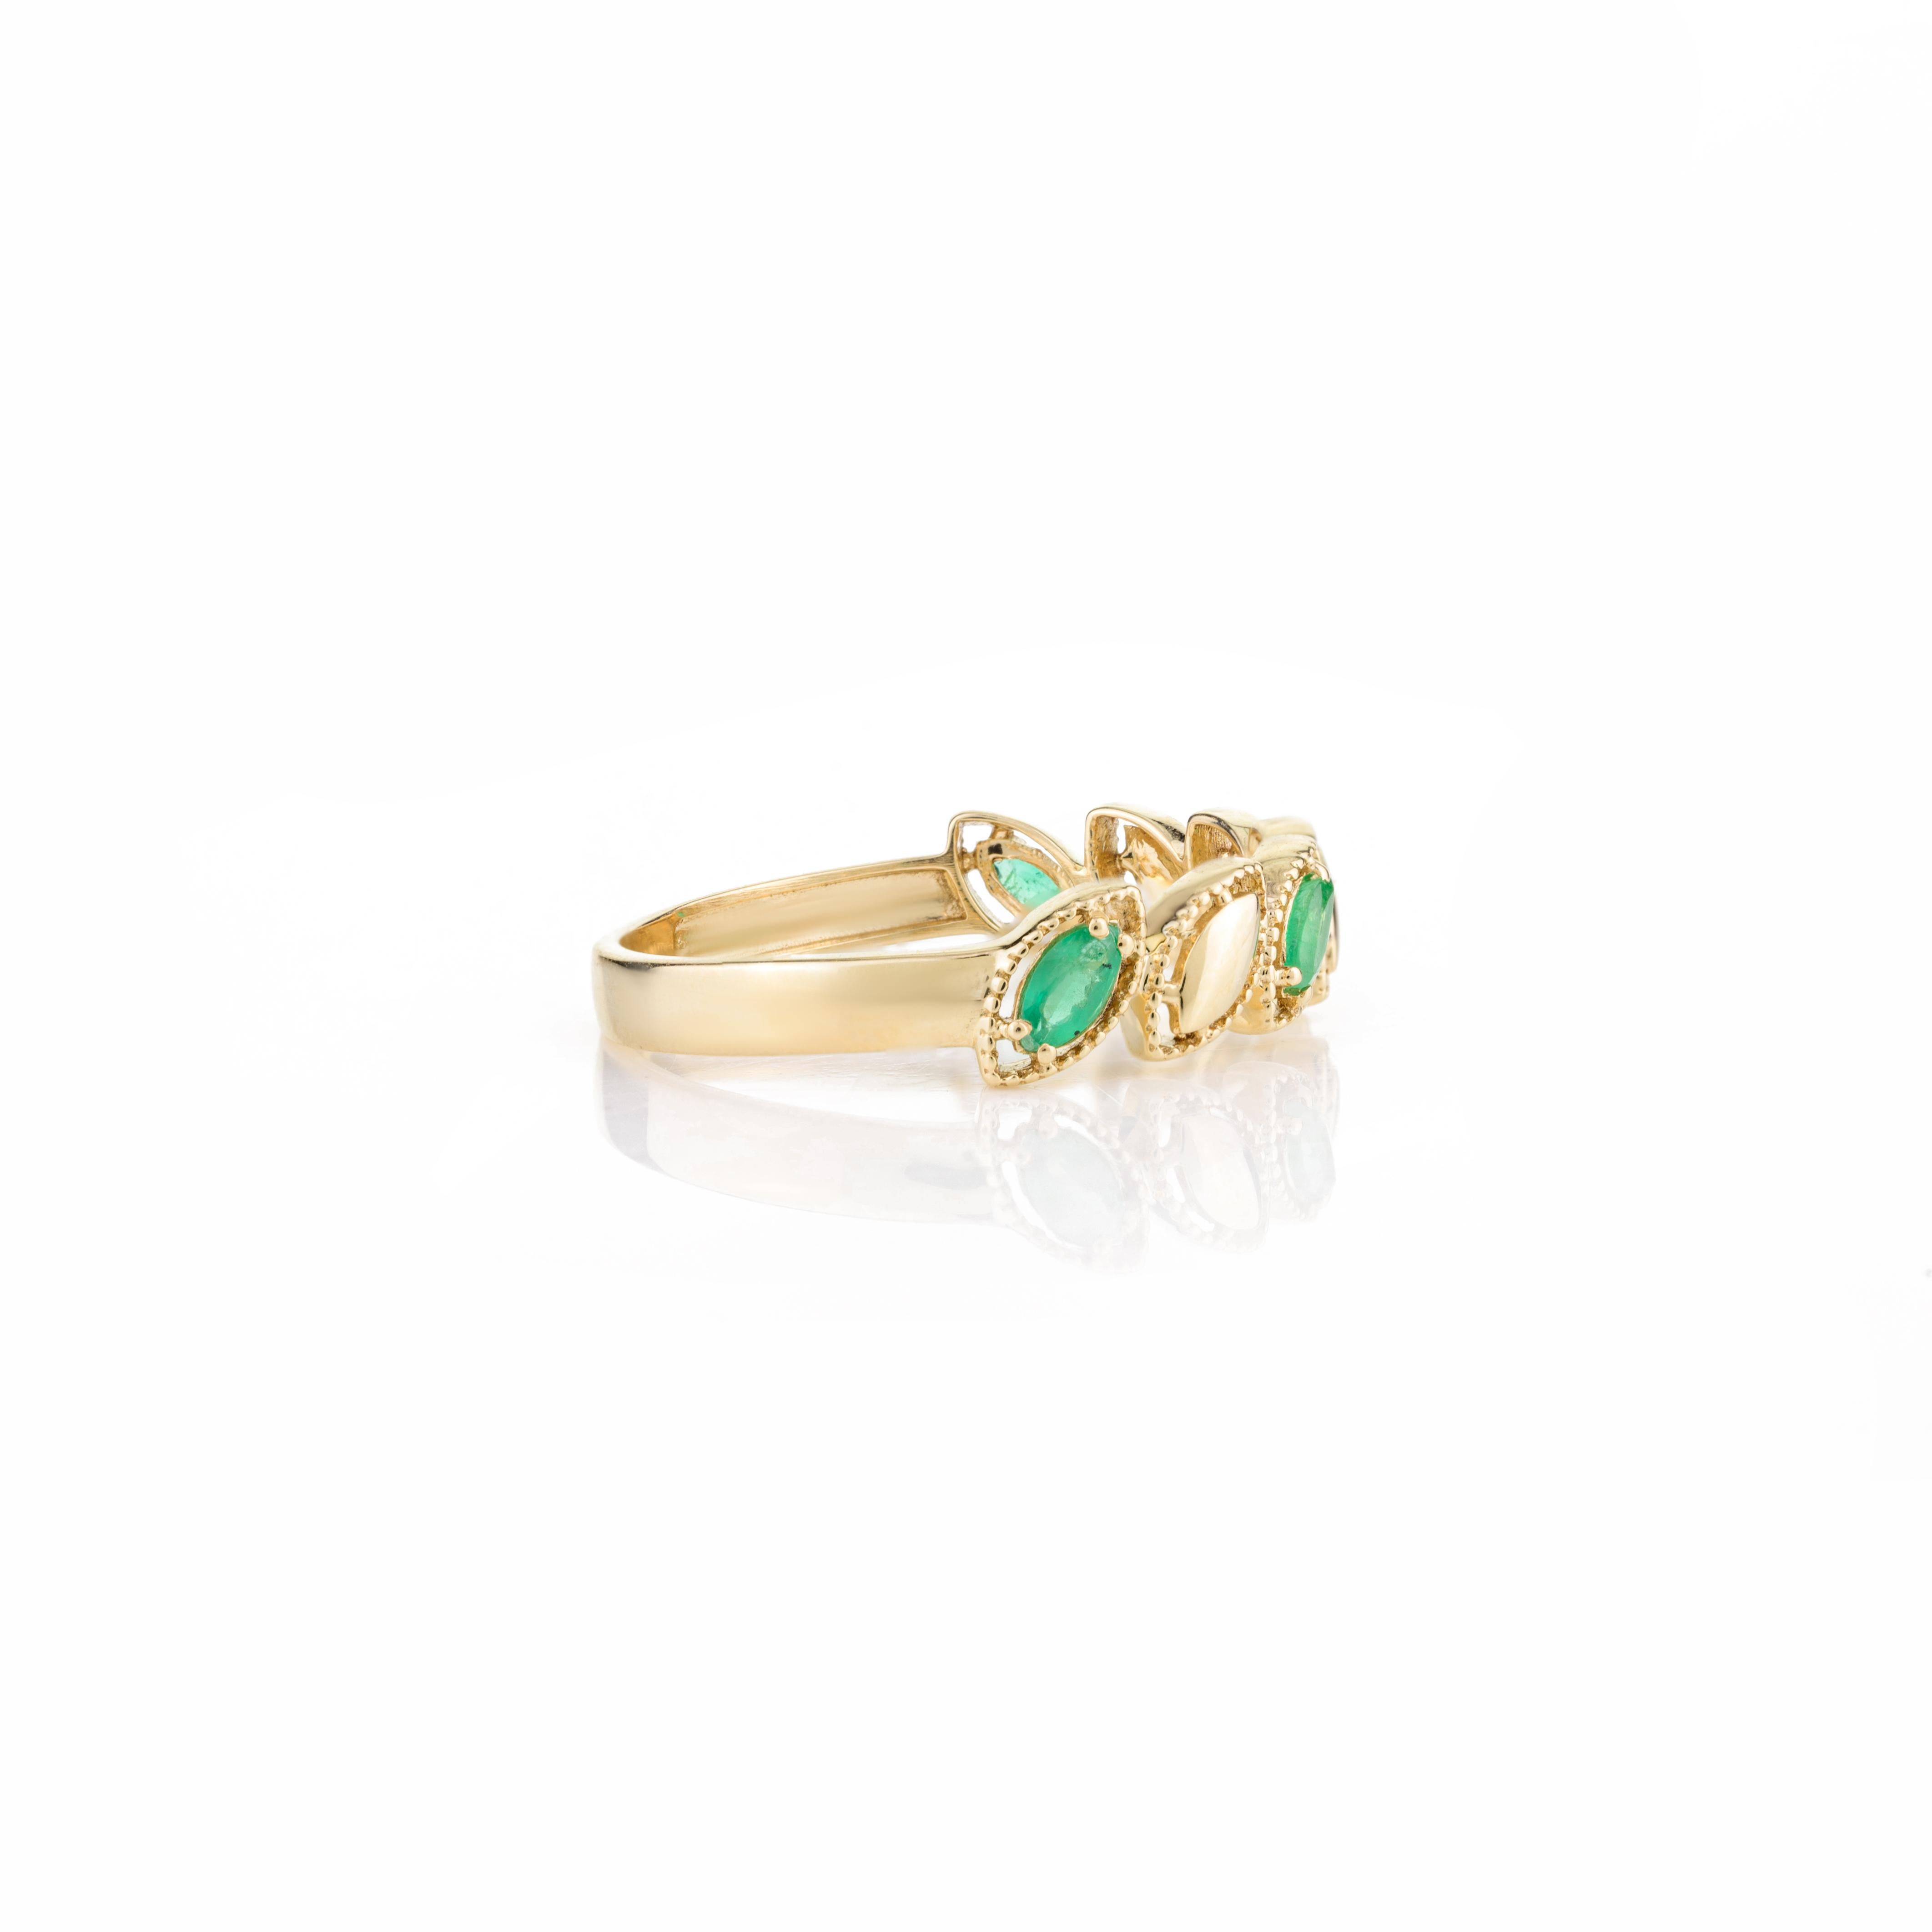 For Sale:  Delicate Emerald Birthstone Wedding Band Ring for Women in 14k Solid Yellow Gold 3